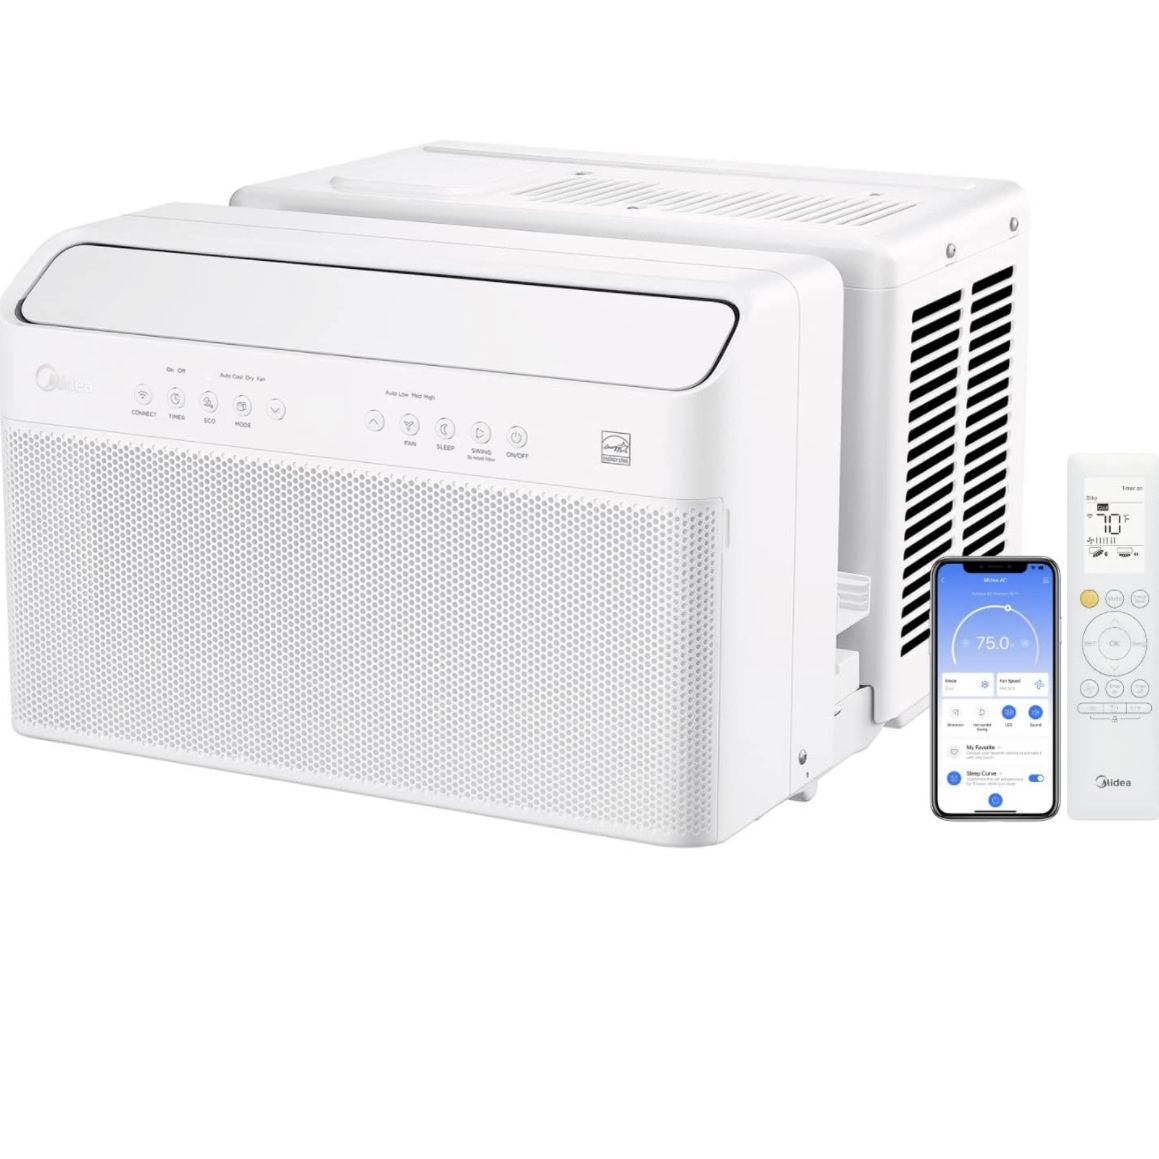 18-47 Midea 12,000 BTU U-Shaped Smart Inverter Window Air Conditioner–Cools up to 550 Sq. Ft., Ultra Quiet with Open Window Flexibility, Works with Al